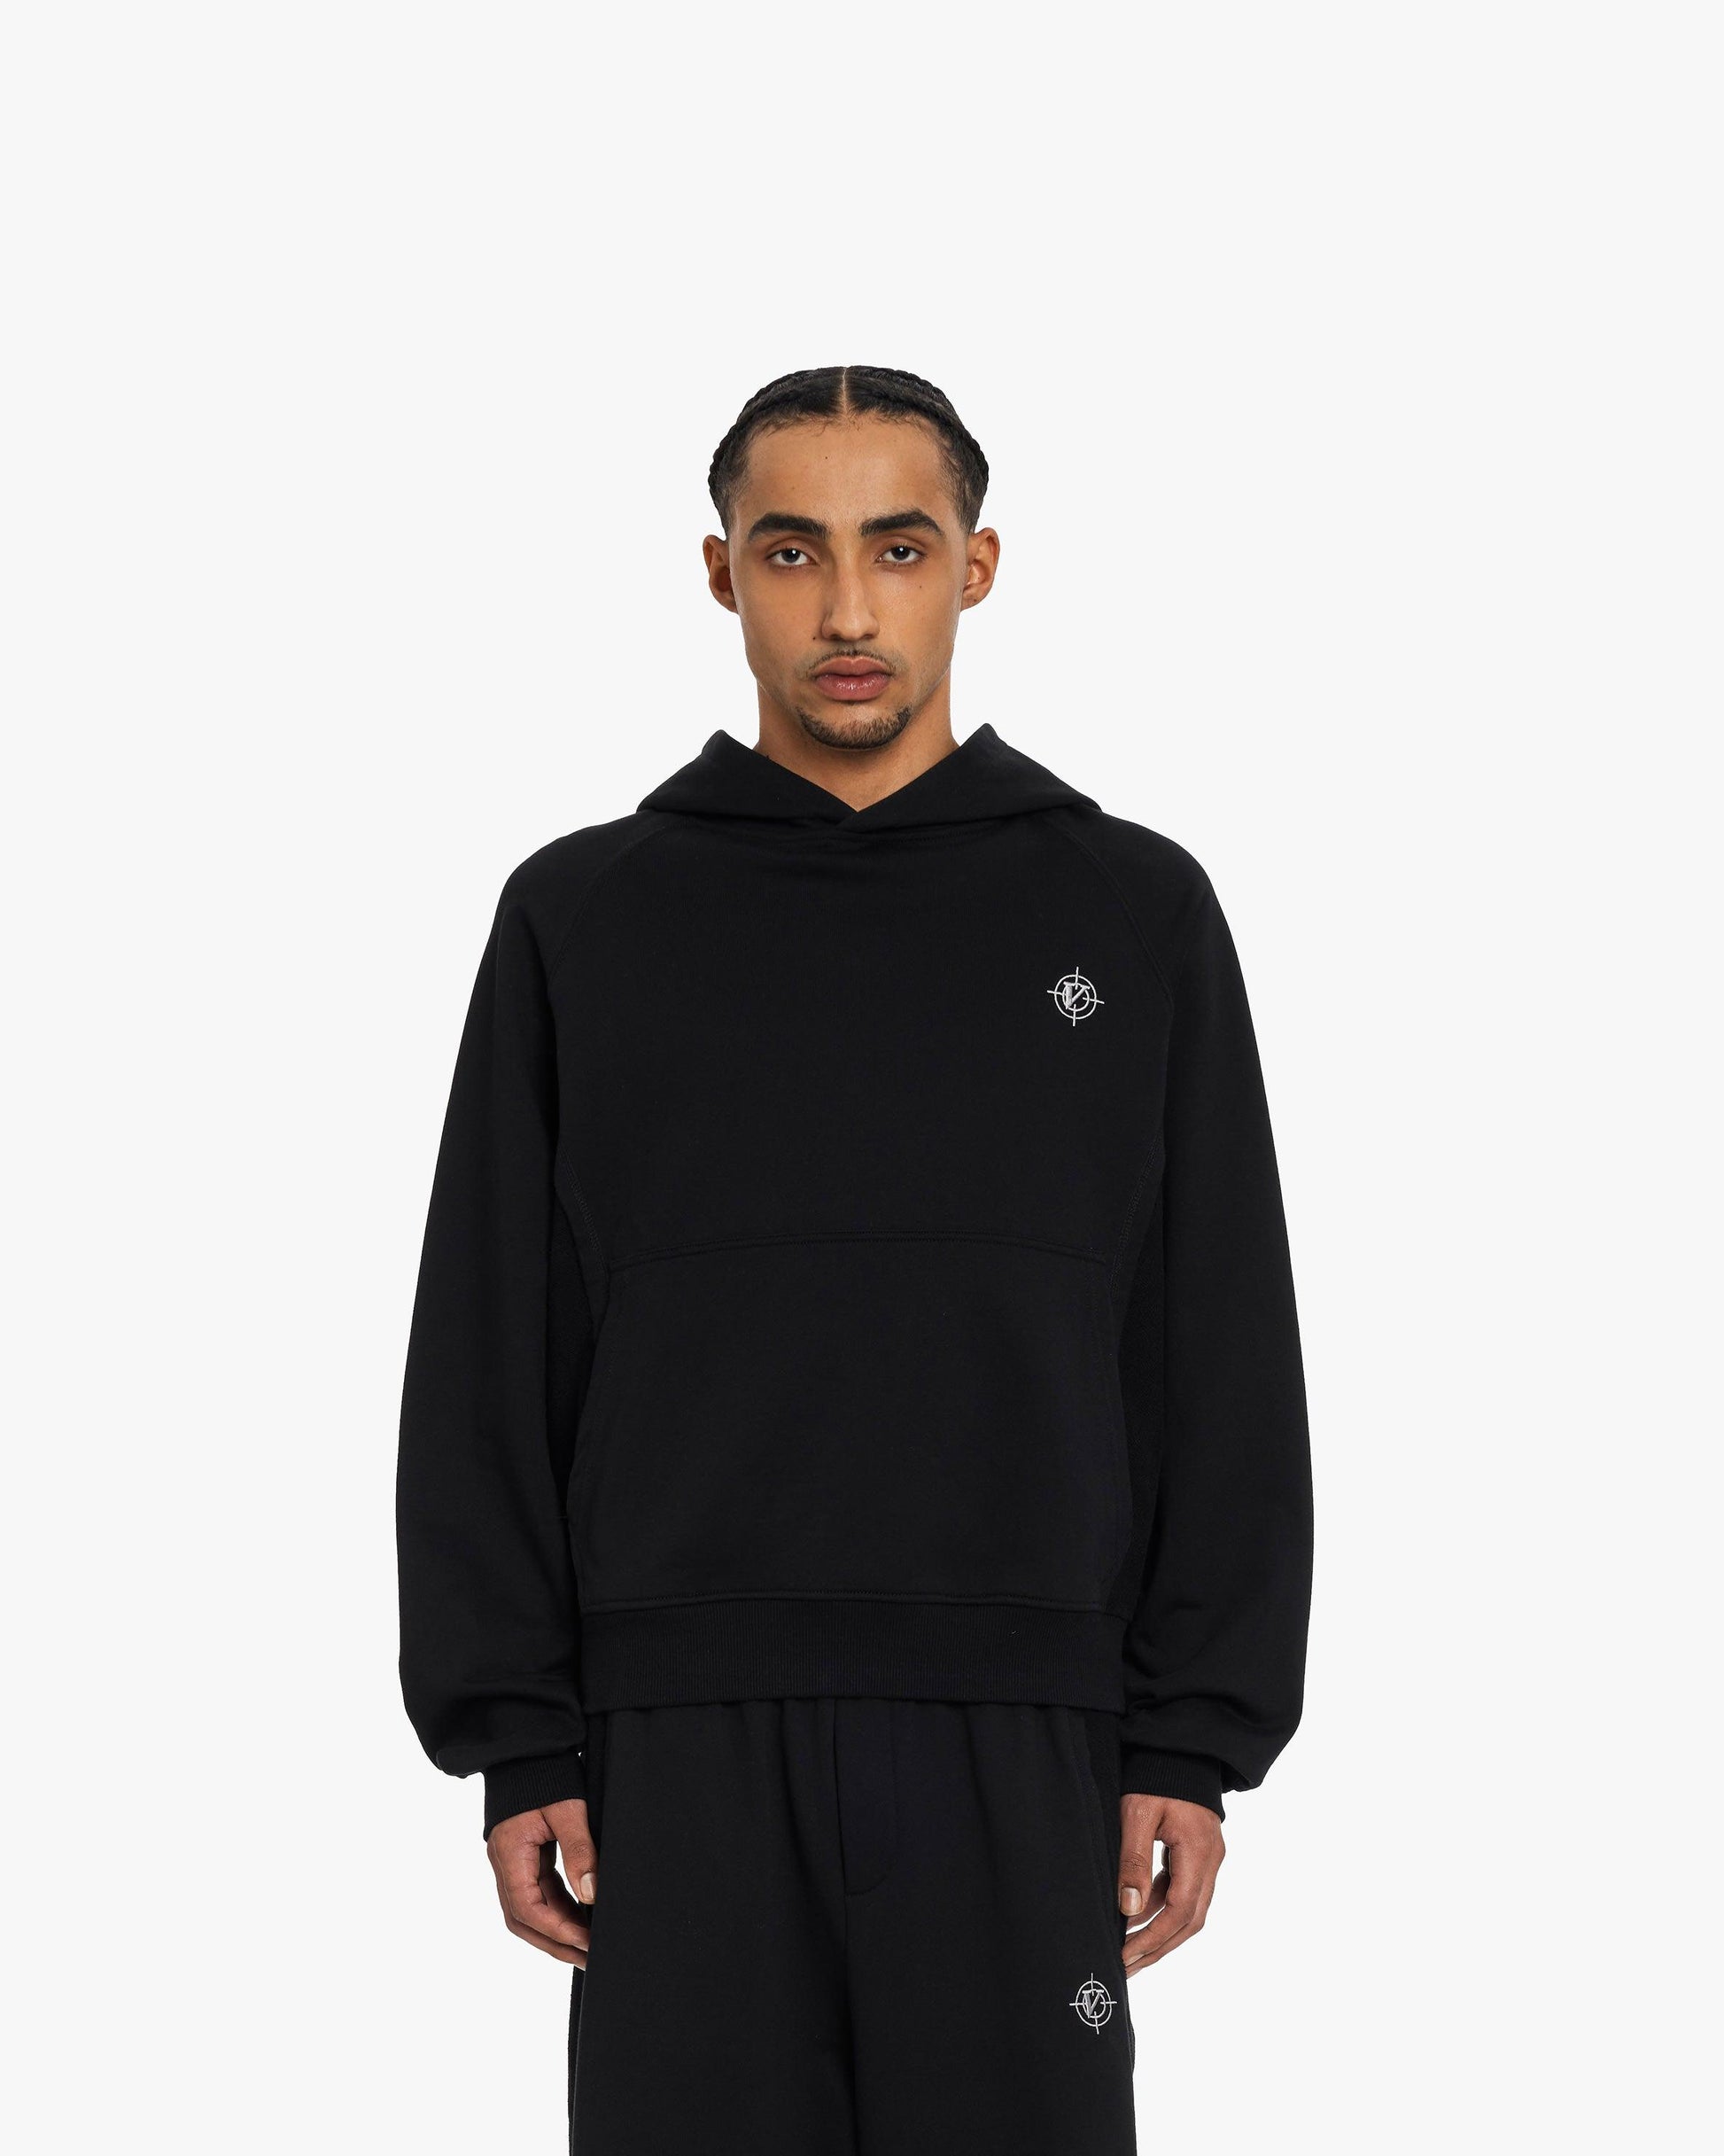 INSIDE OUT HOODIE BLACK - VICINITY